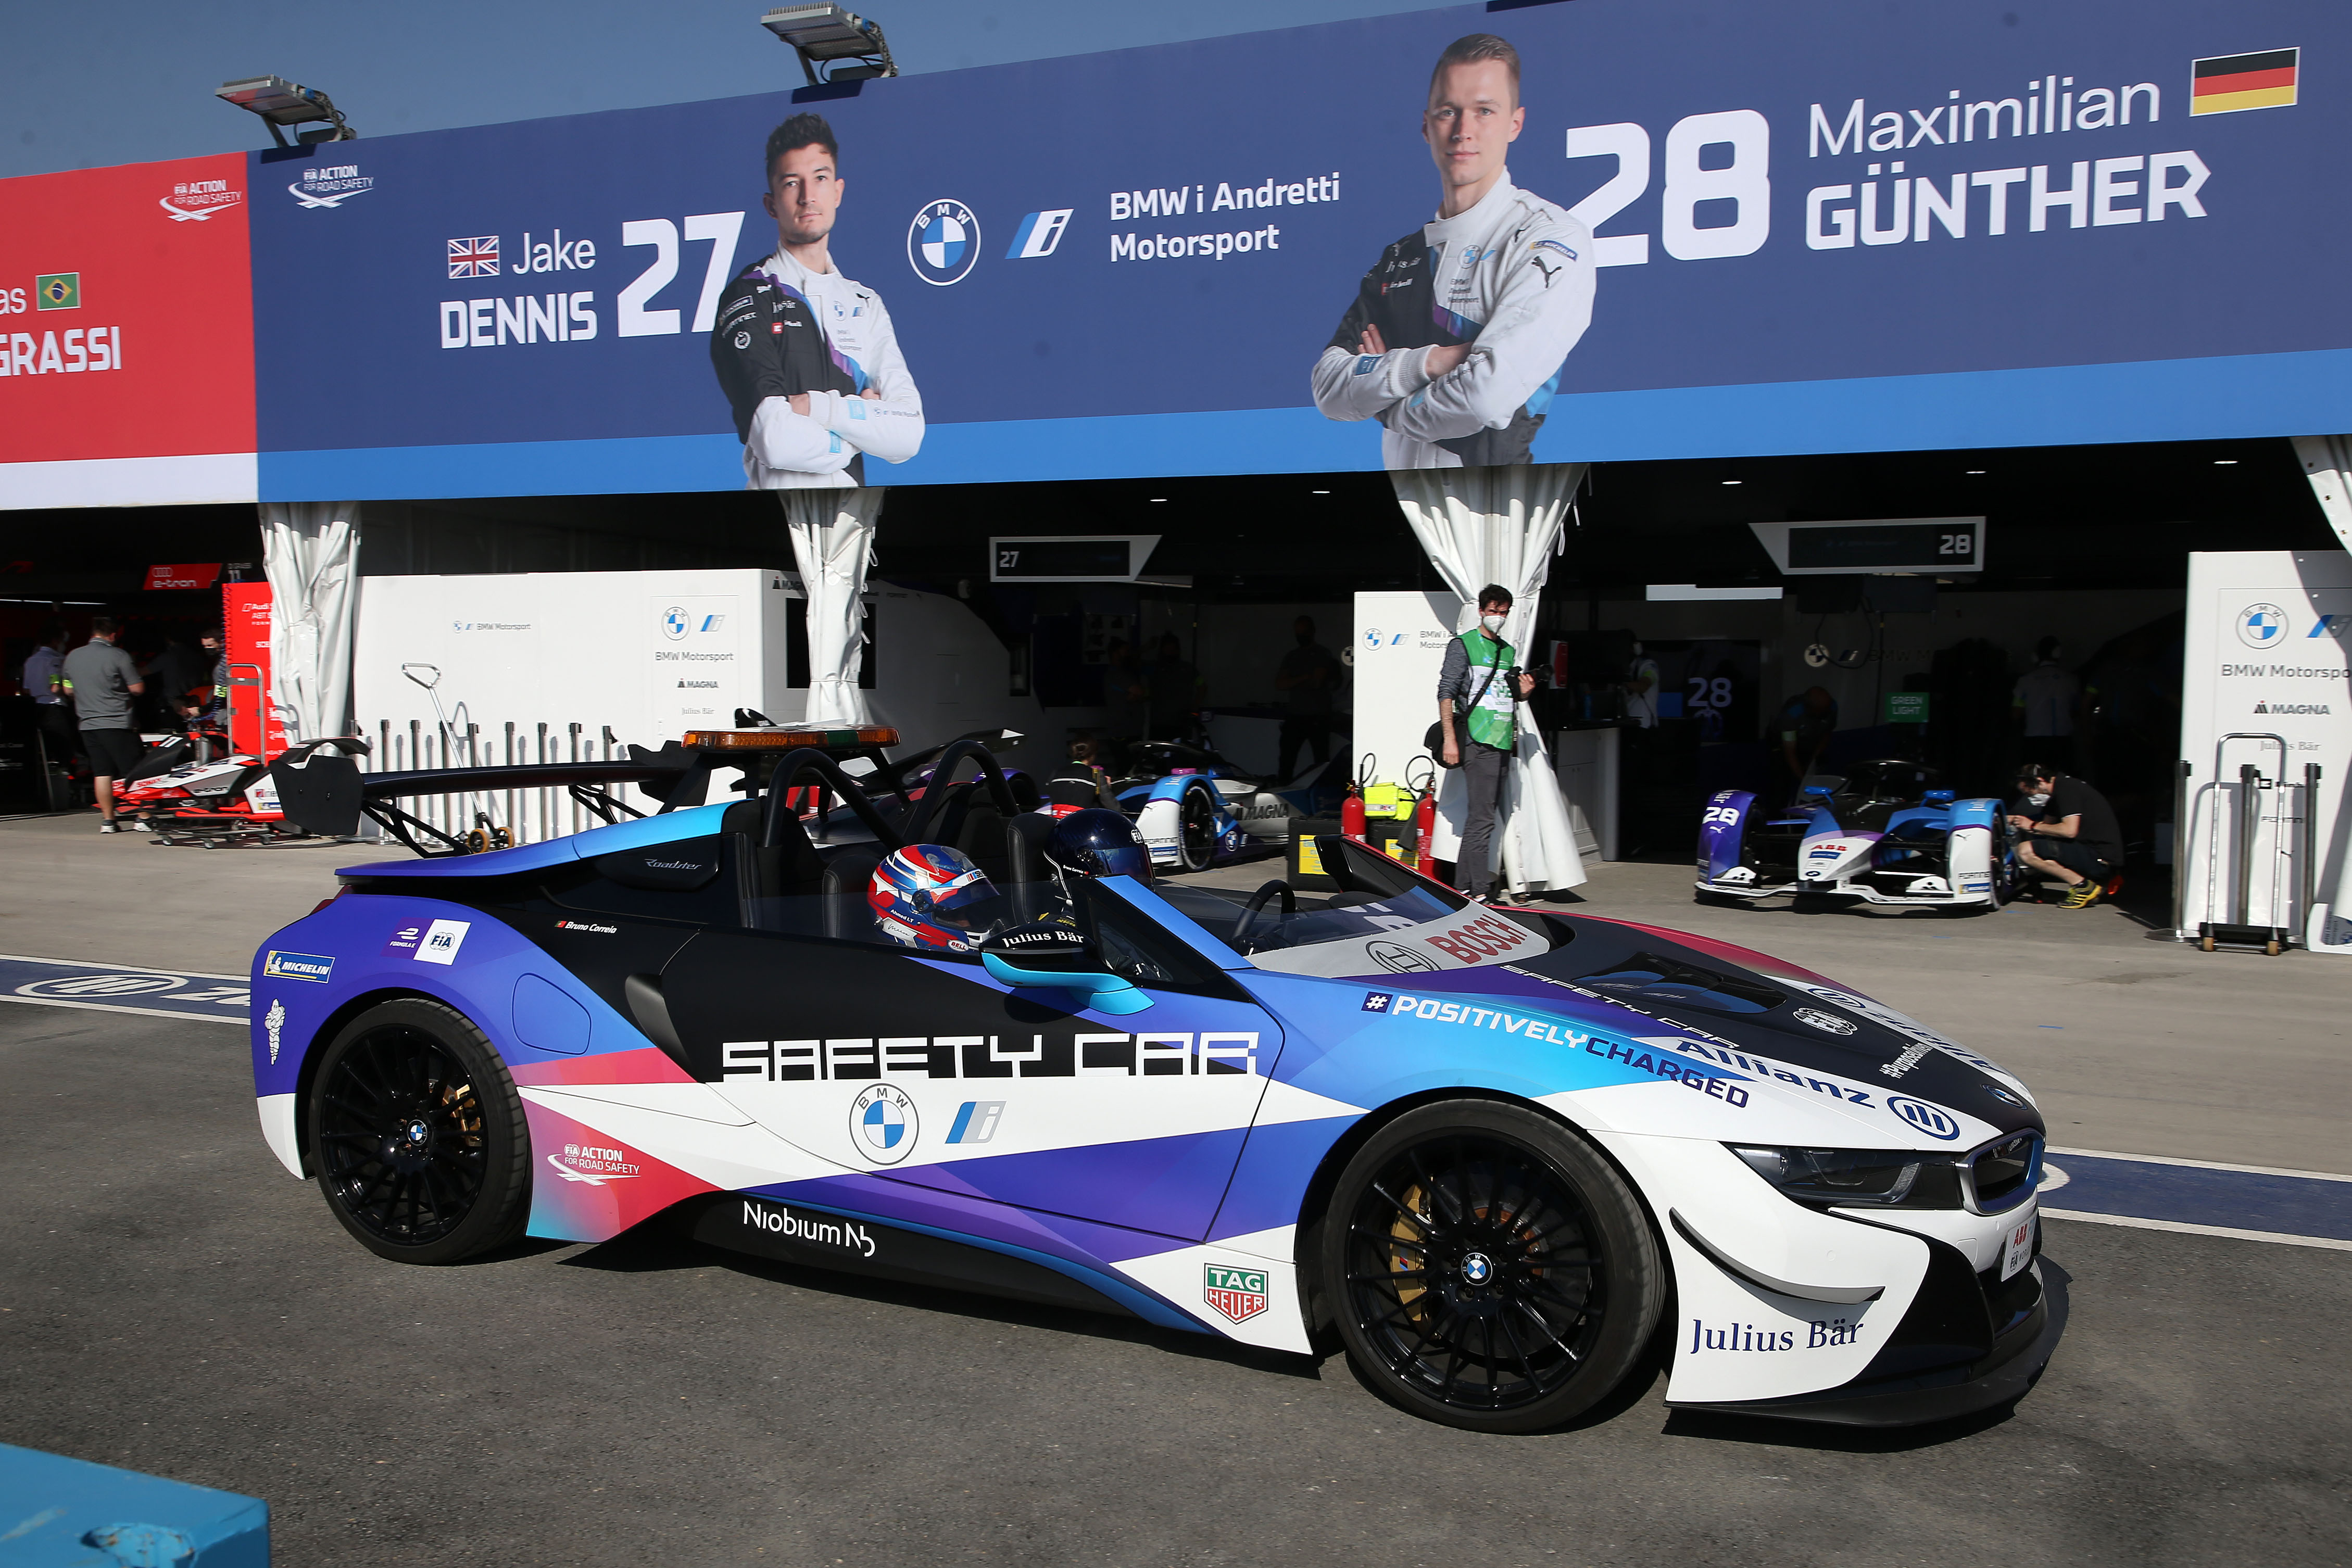 BMW i Andretti Motorsport emerges pointless from disappointing second race in Diriyah.